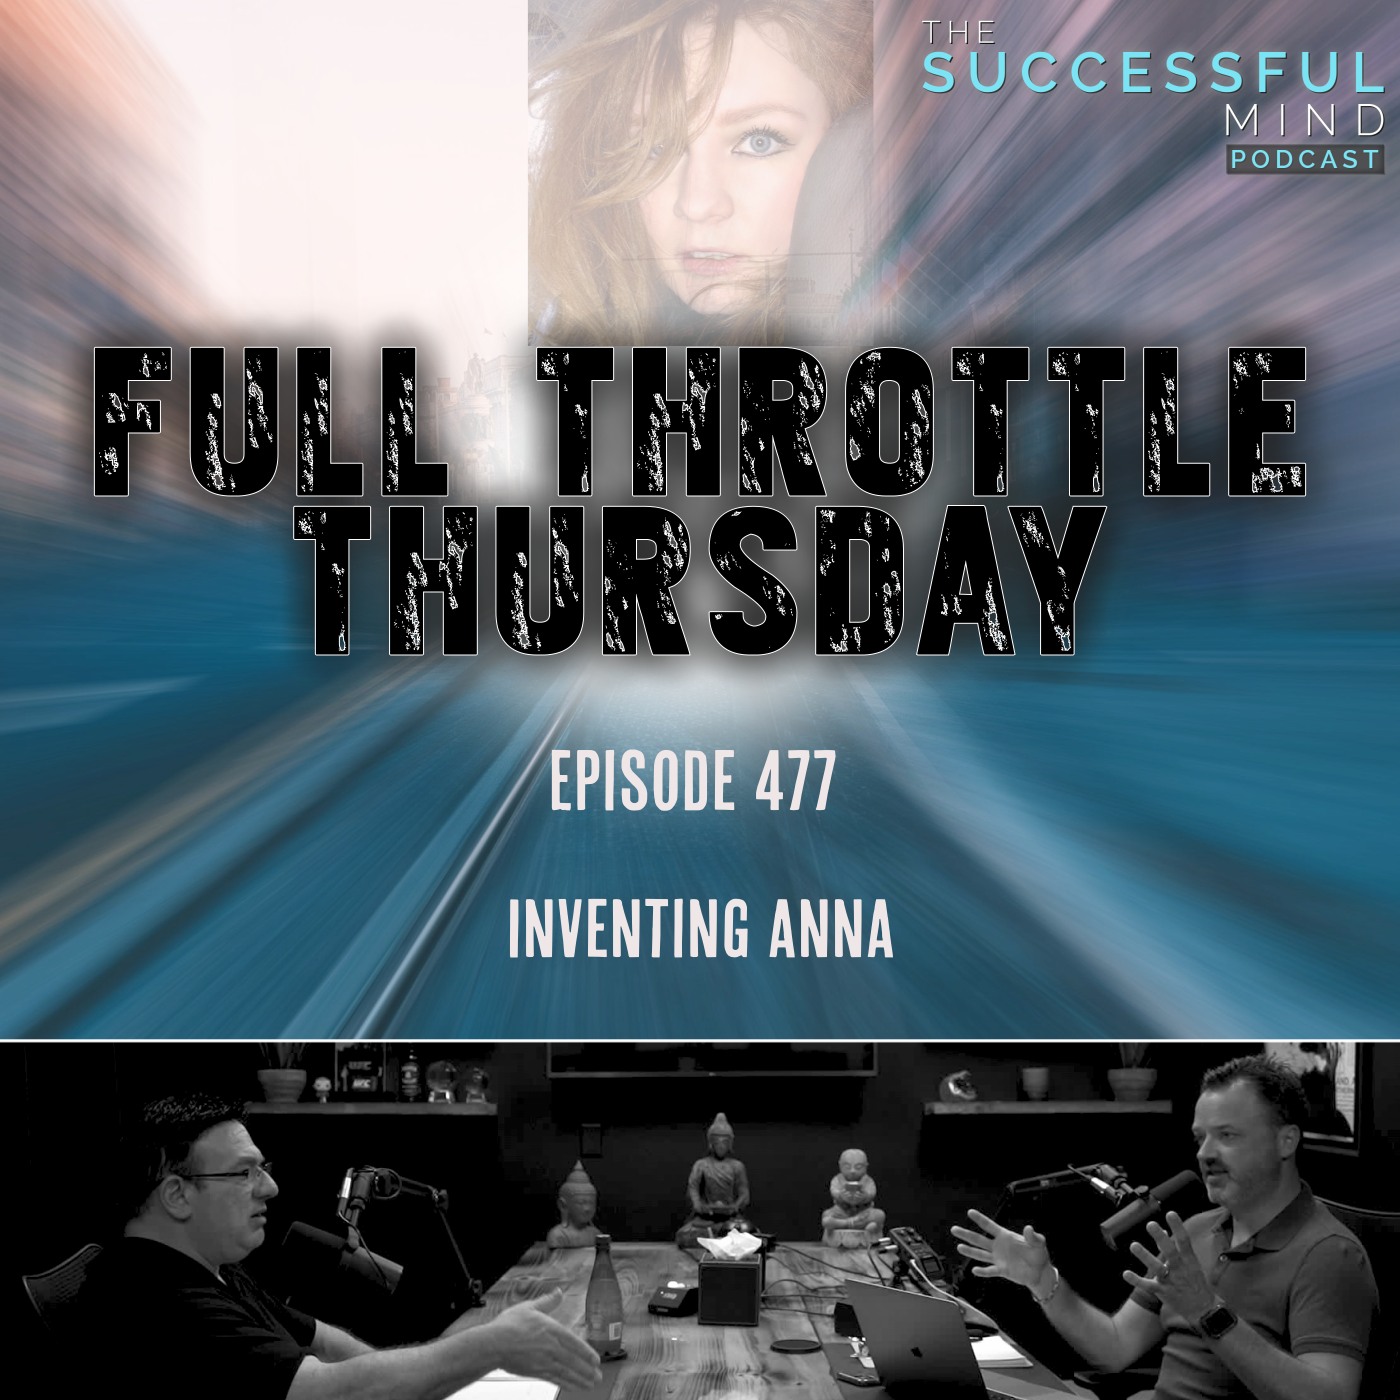 The Successful Mind Podcast - Full Throttle Thursday - Inventing Anna